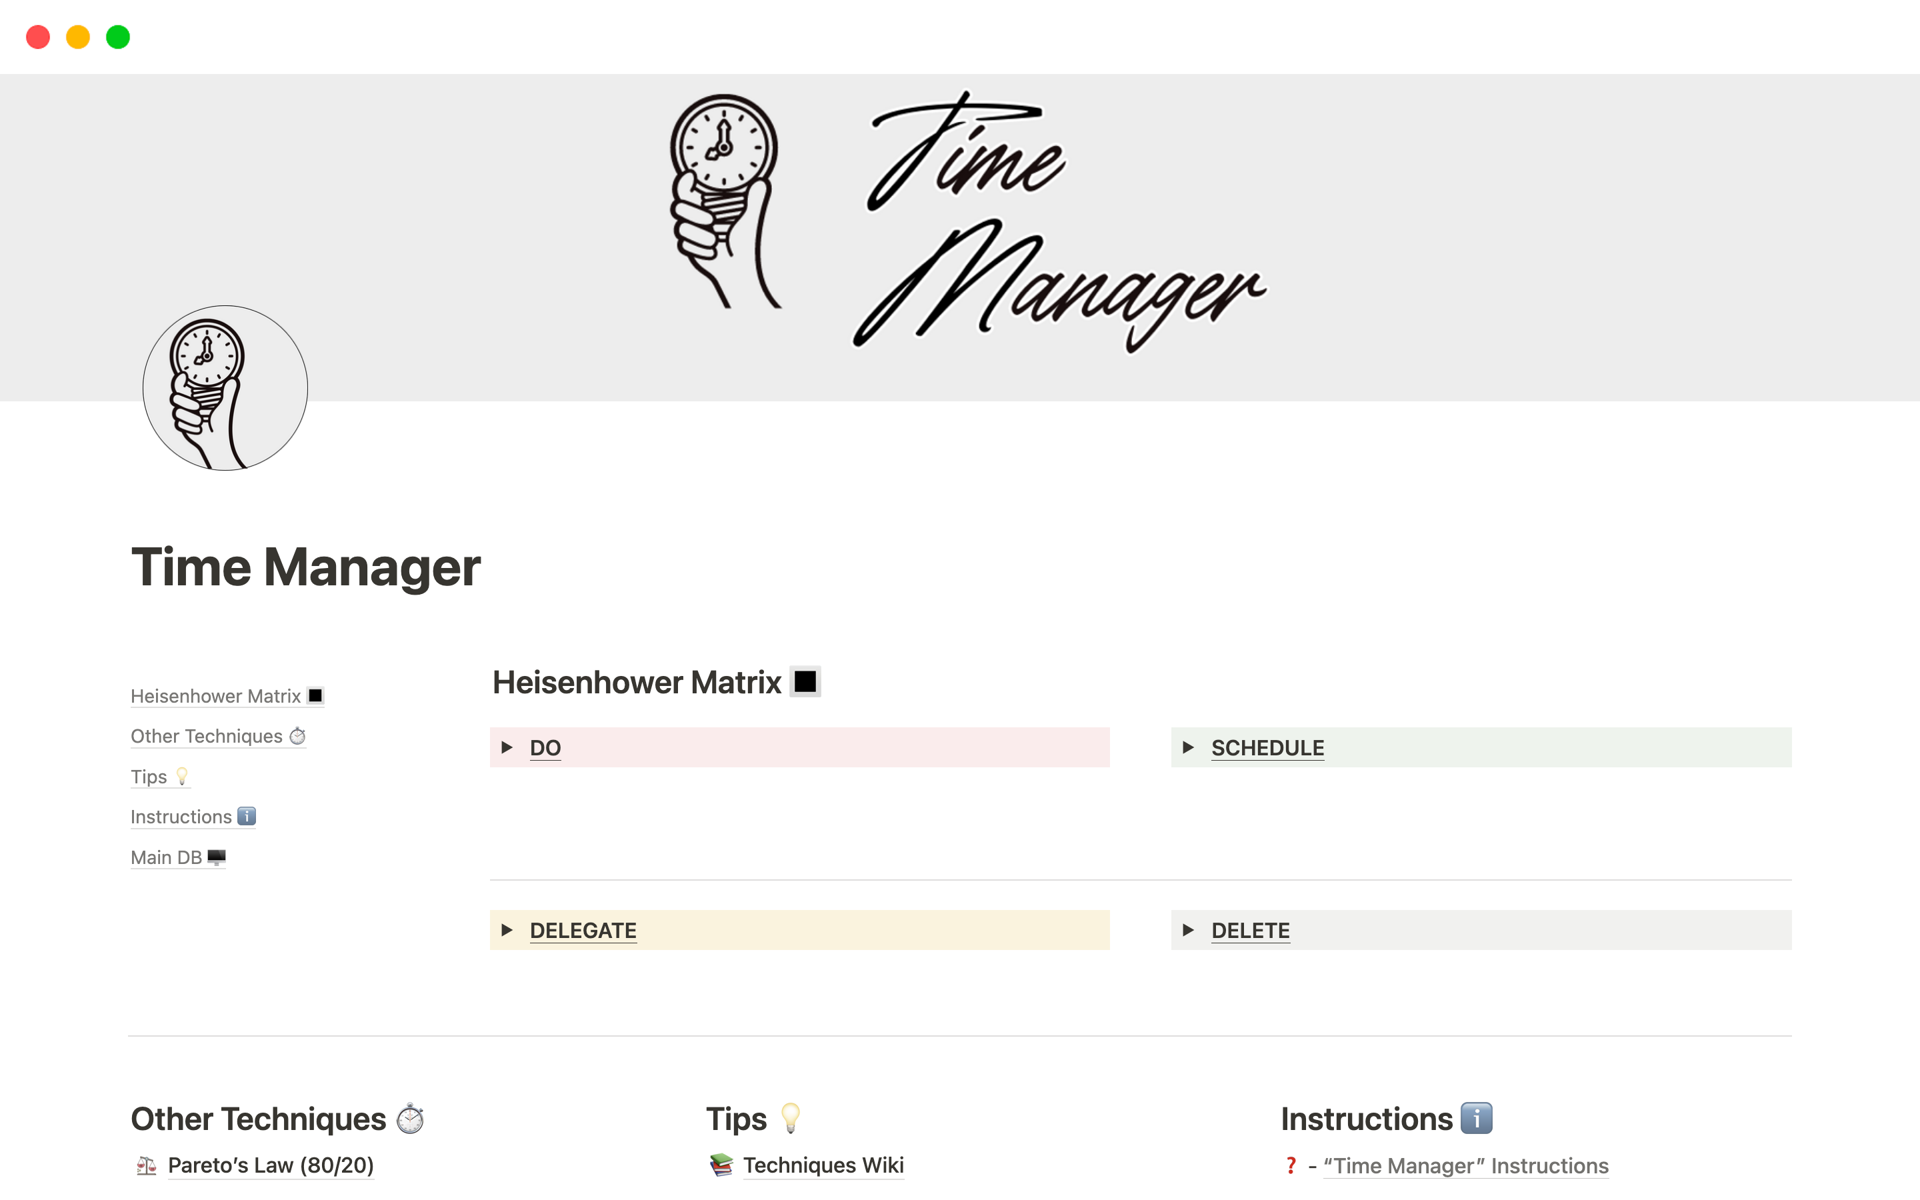 "Time Manager" allows you to manage your time and improve your task planning through four main techniques